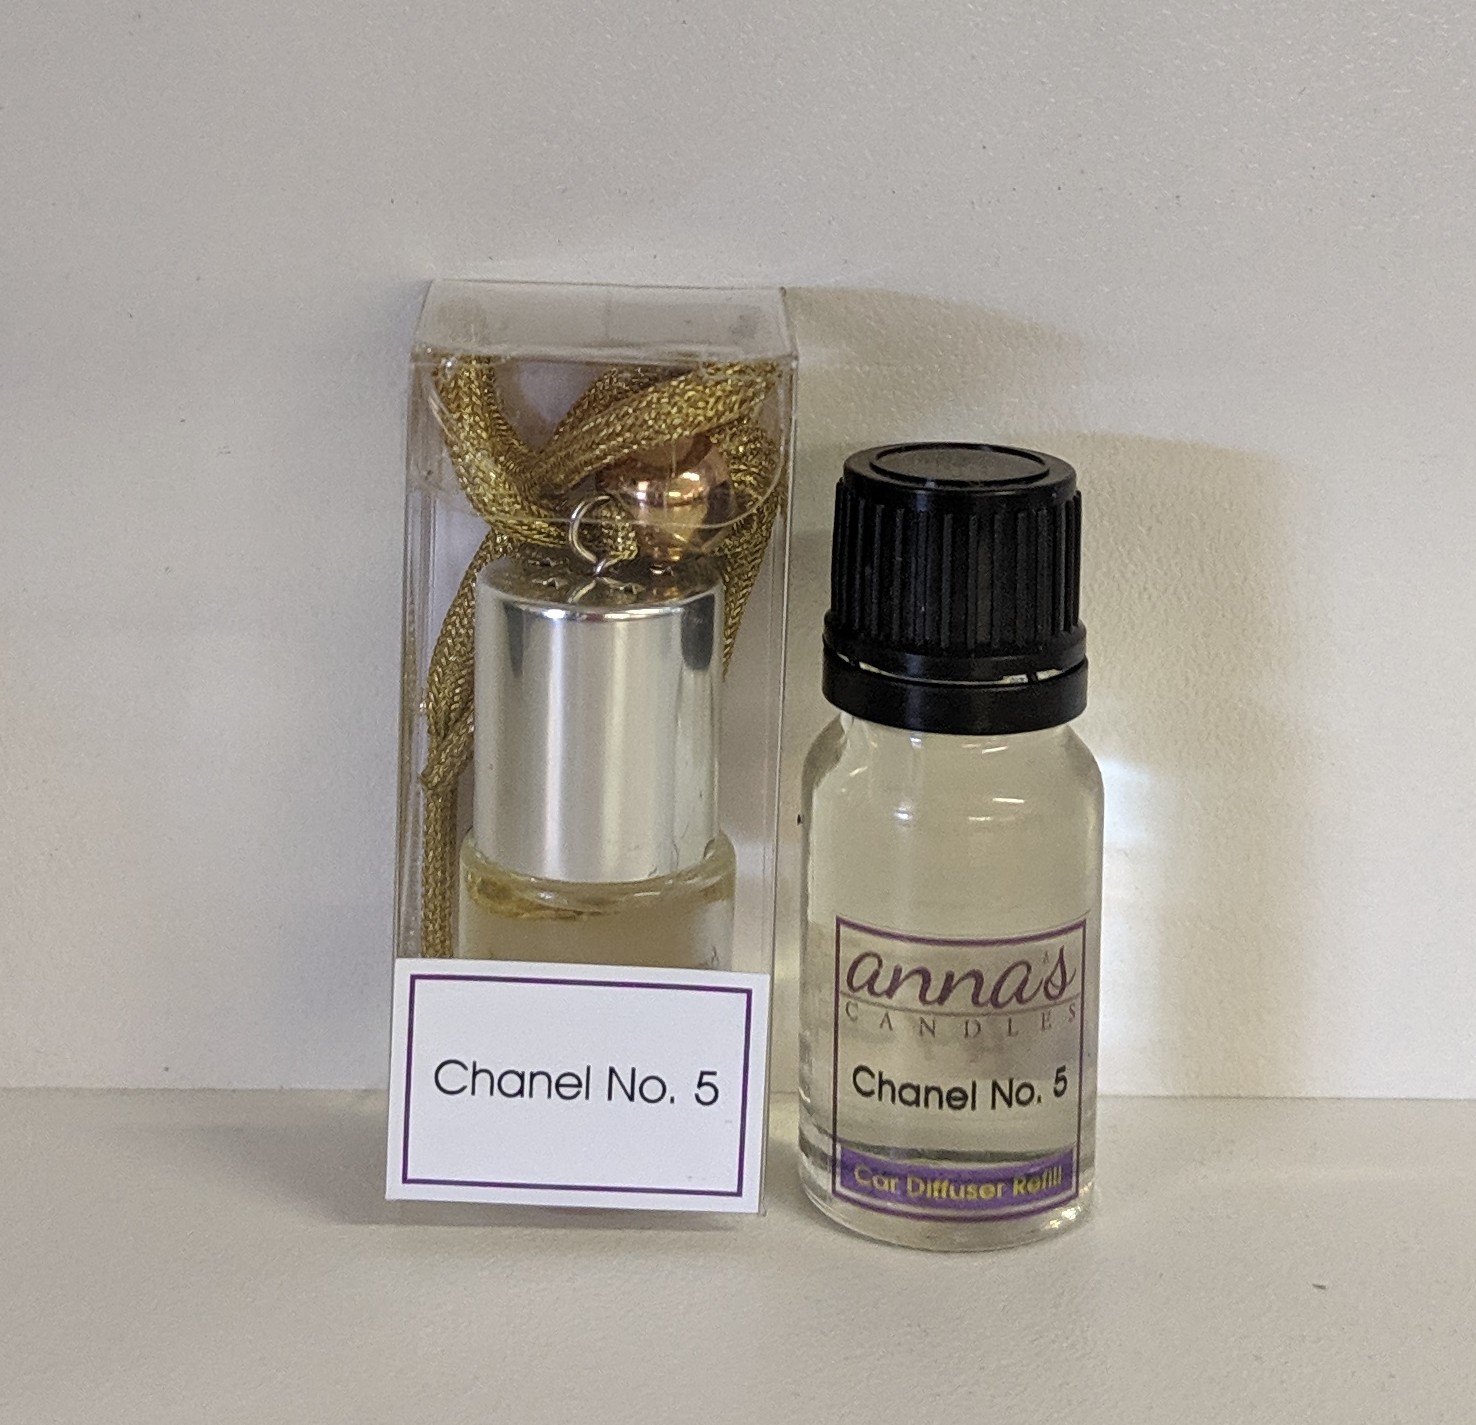 Chanel No. 5 - Chanel Type